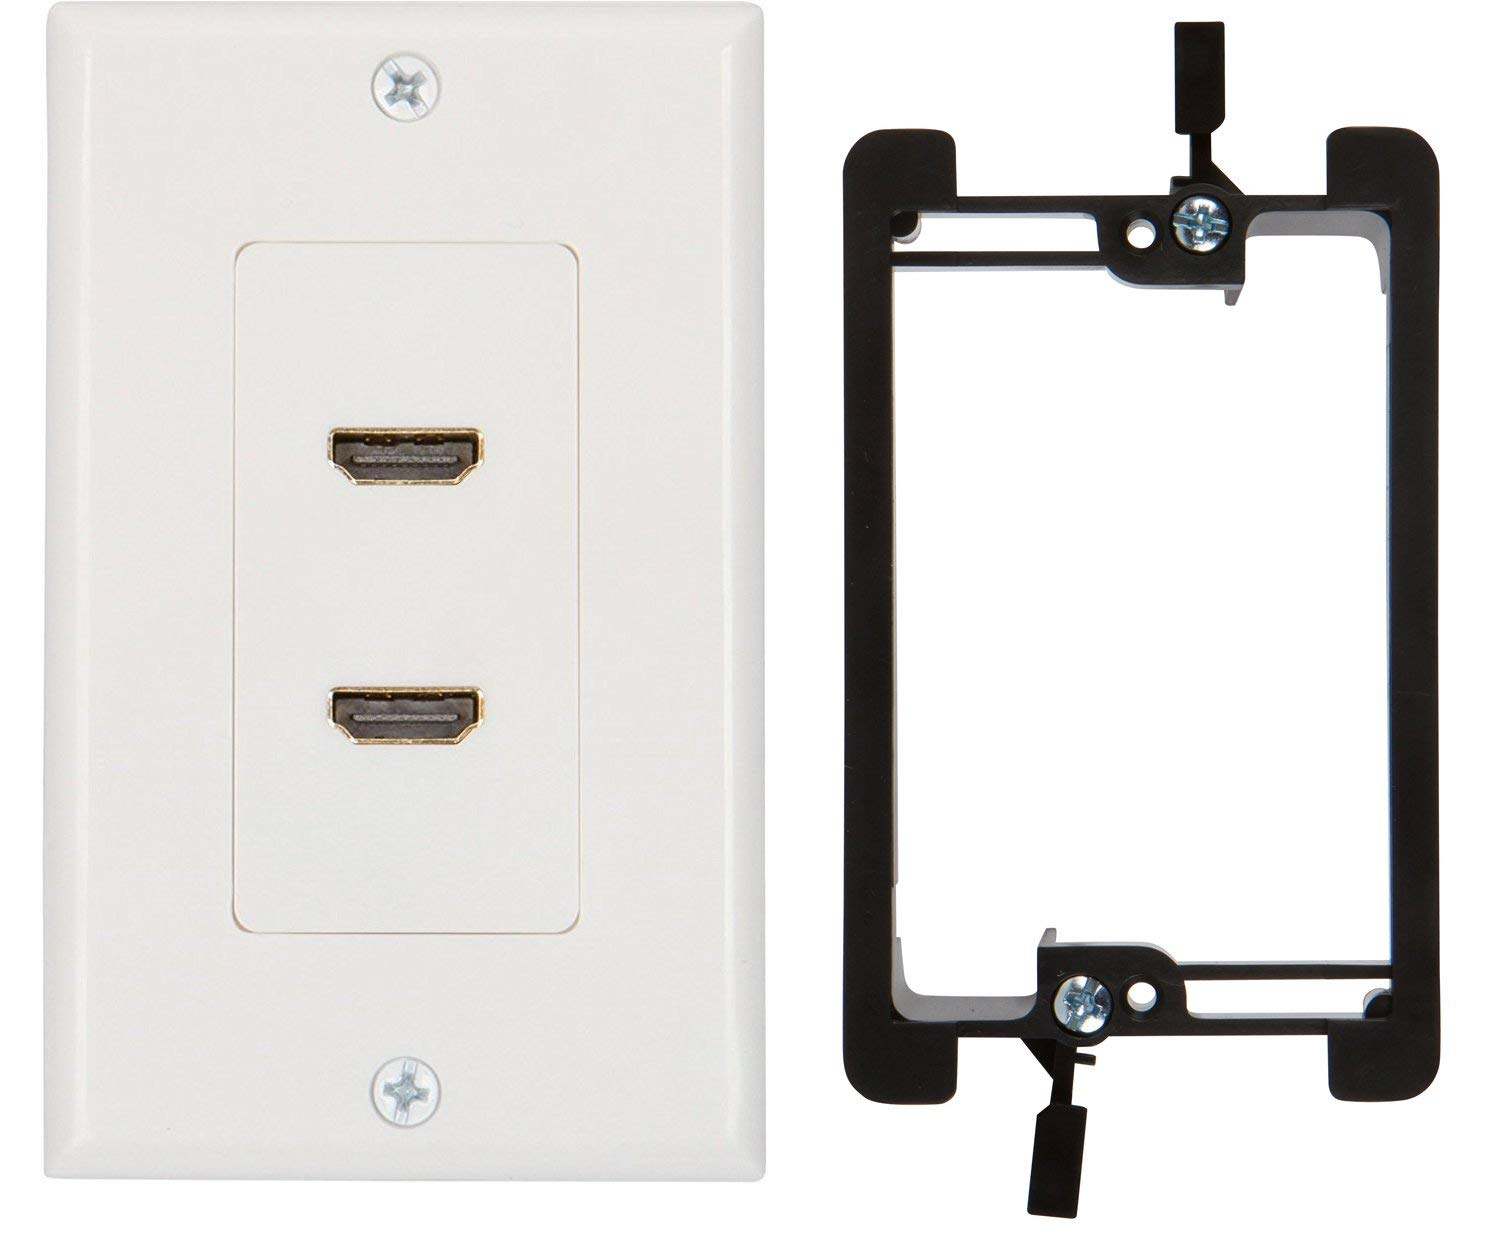 HDMI for 4K 60Hz 10, Black UL Listed Work for Home Theater,HDTV and More Buyer's Point HDMI Pigtail 3GHz Coax Wall Plate 